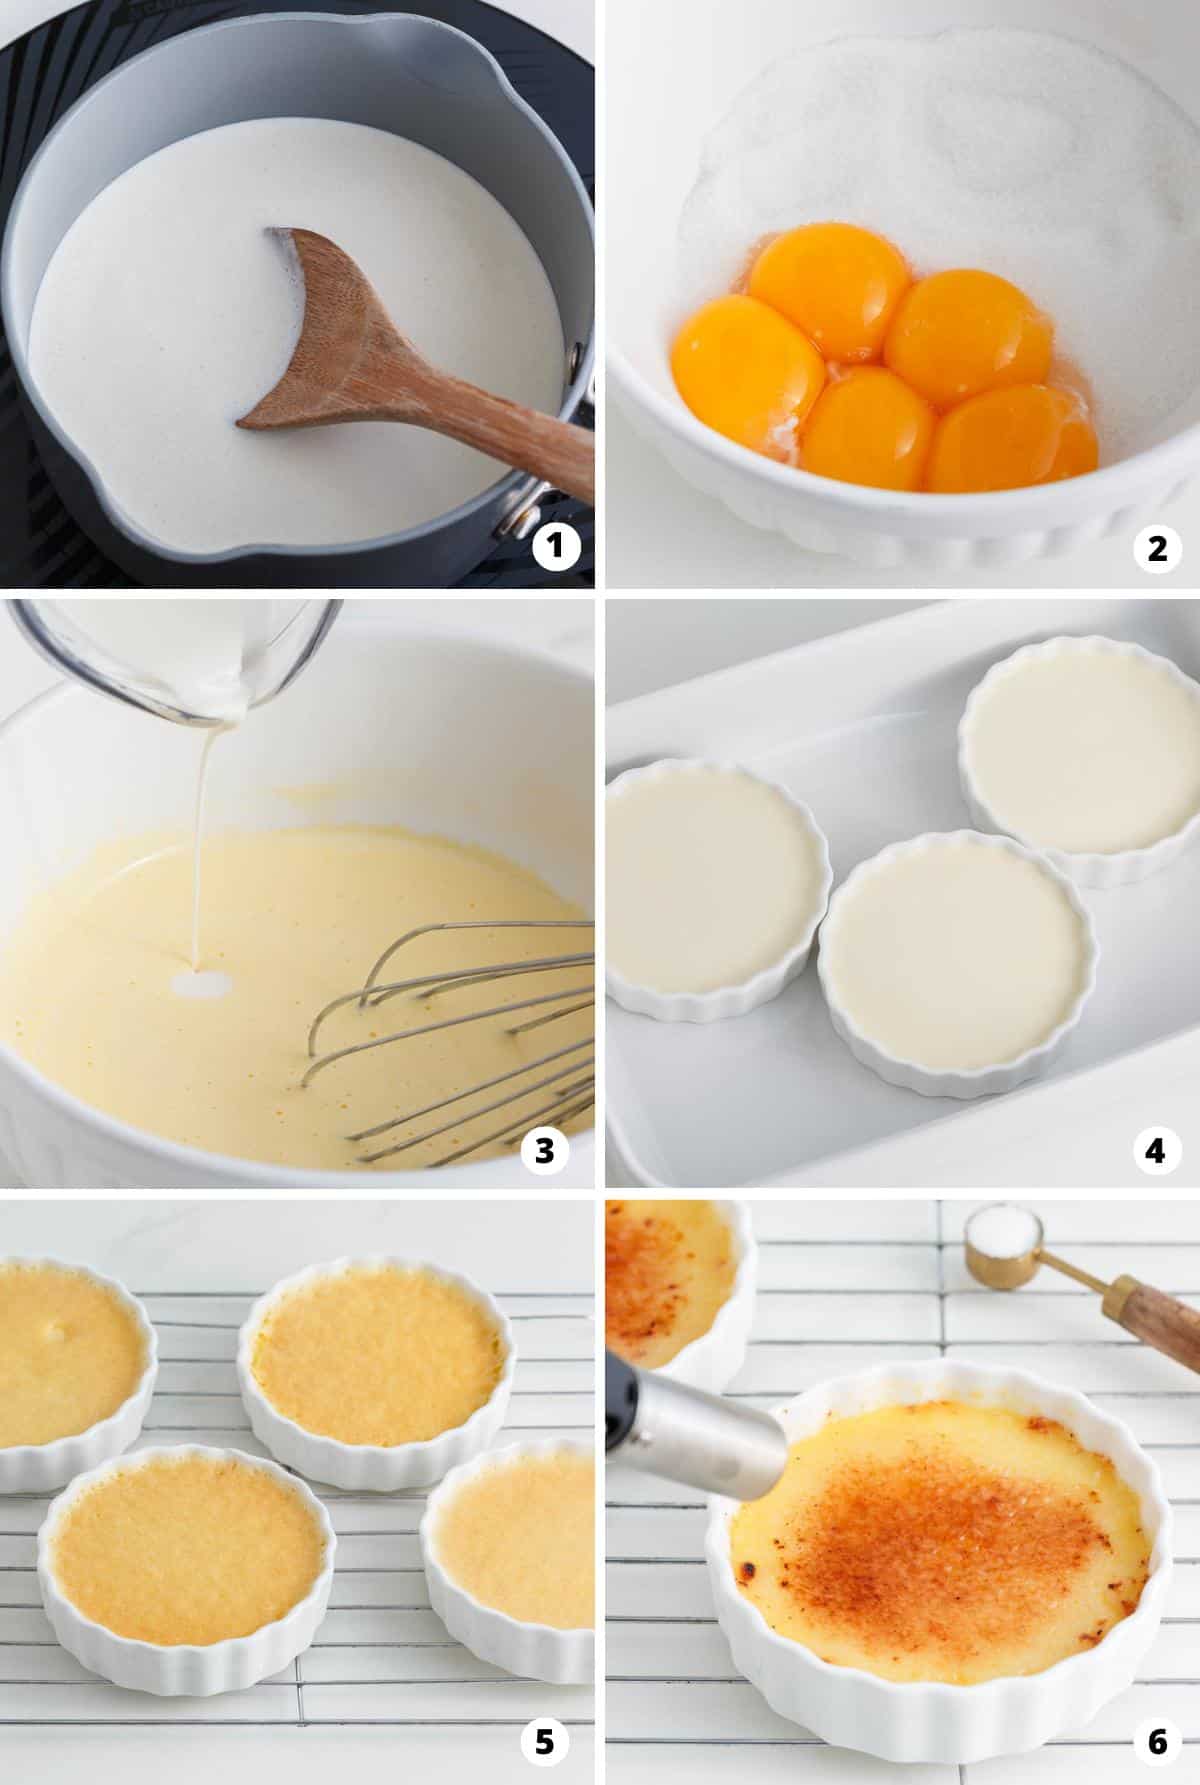 Showing how to make creme brulee in a 6 step collage.